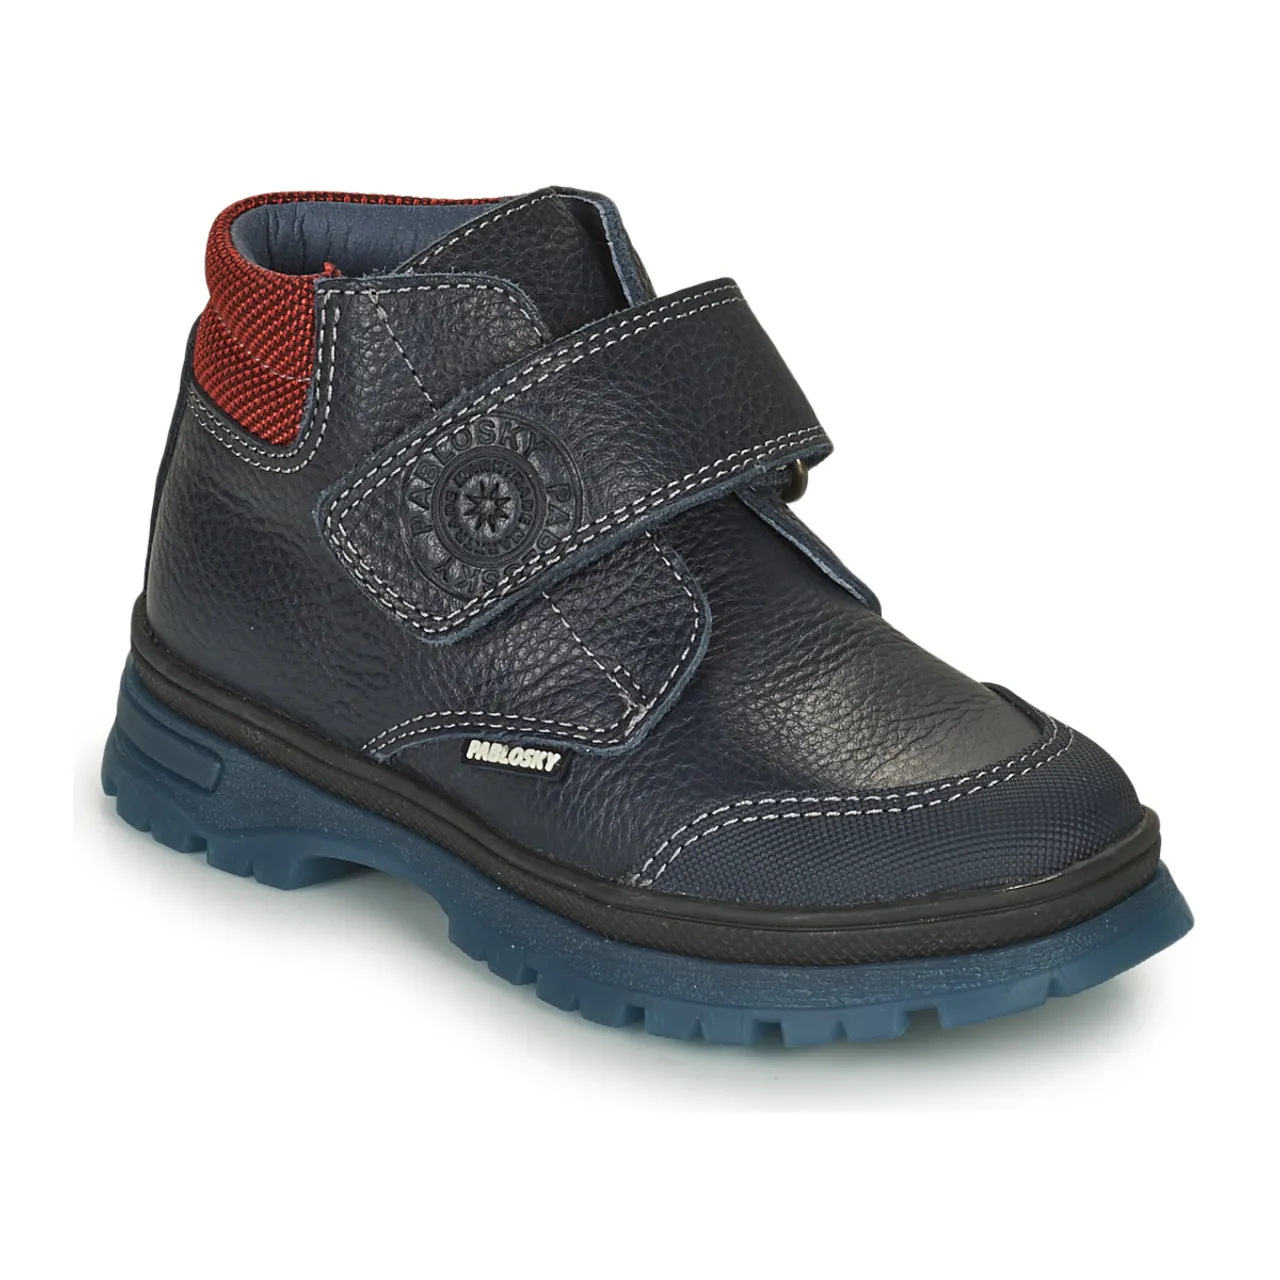 Pablosky  502923  boys's Children's Mid Boots in Blue